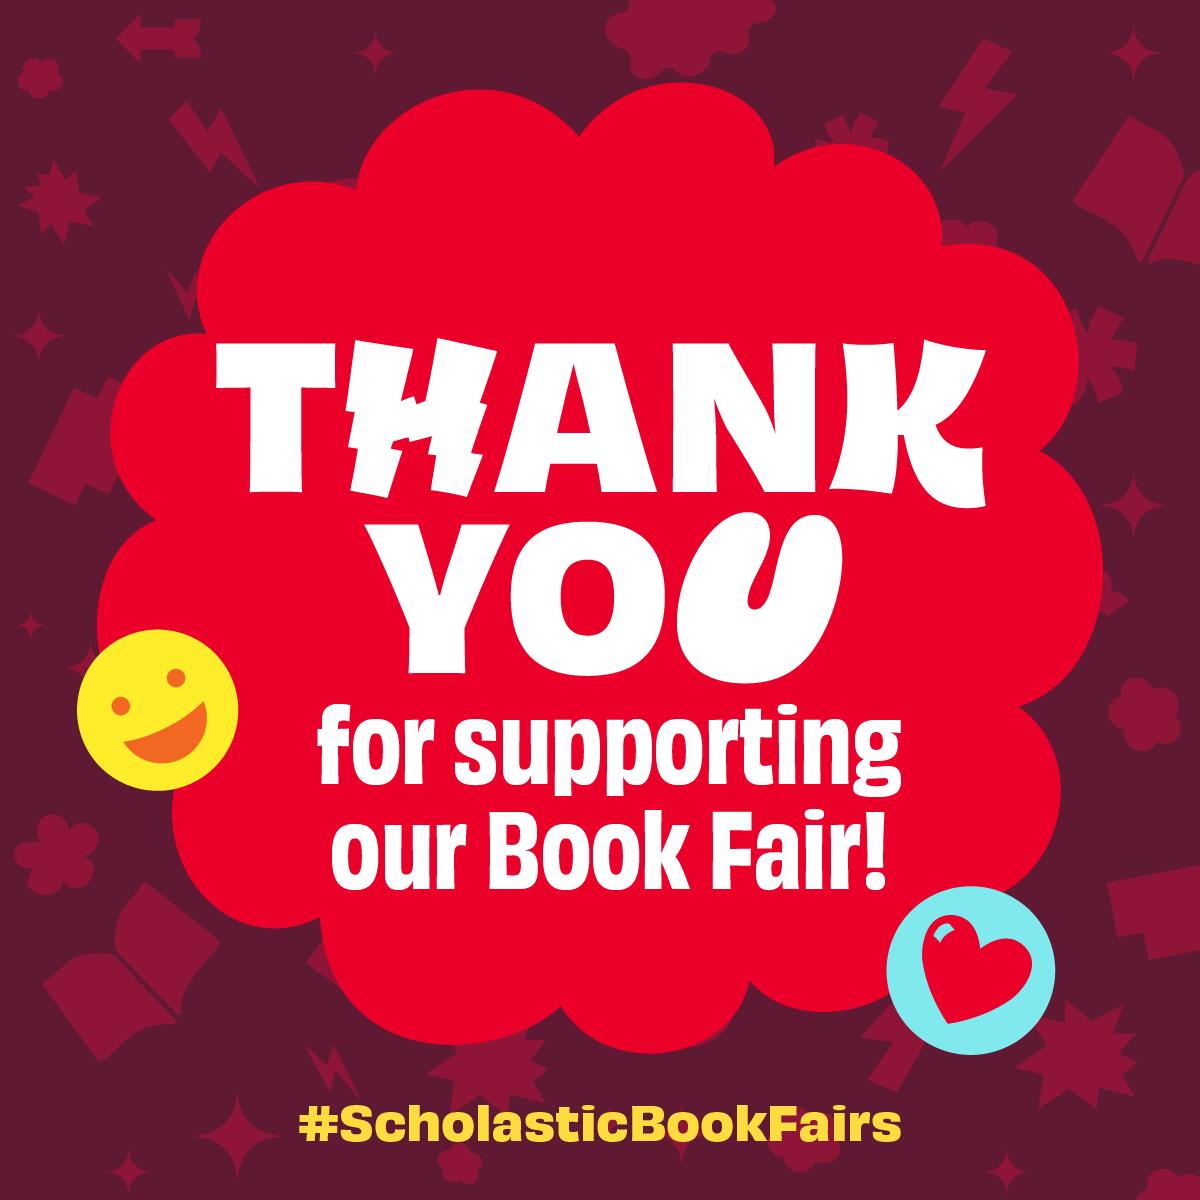 Save the Date for the Book Fair